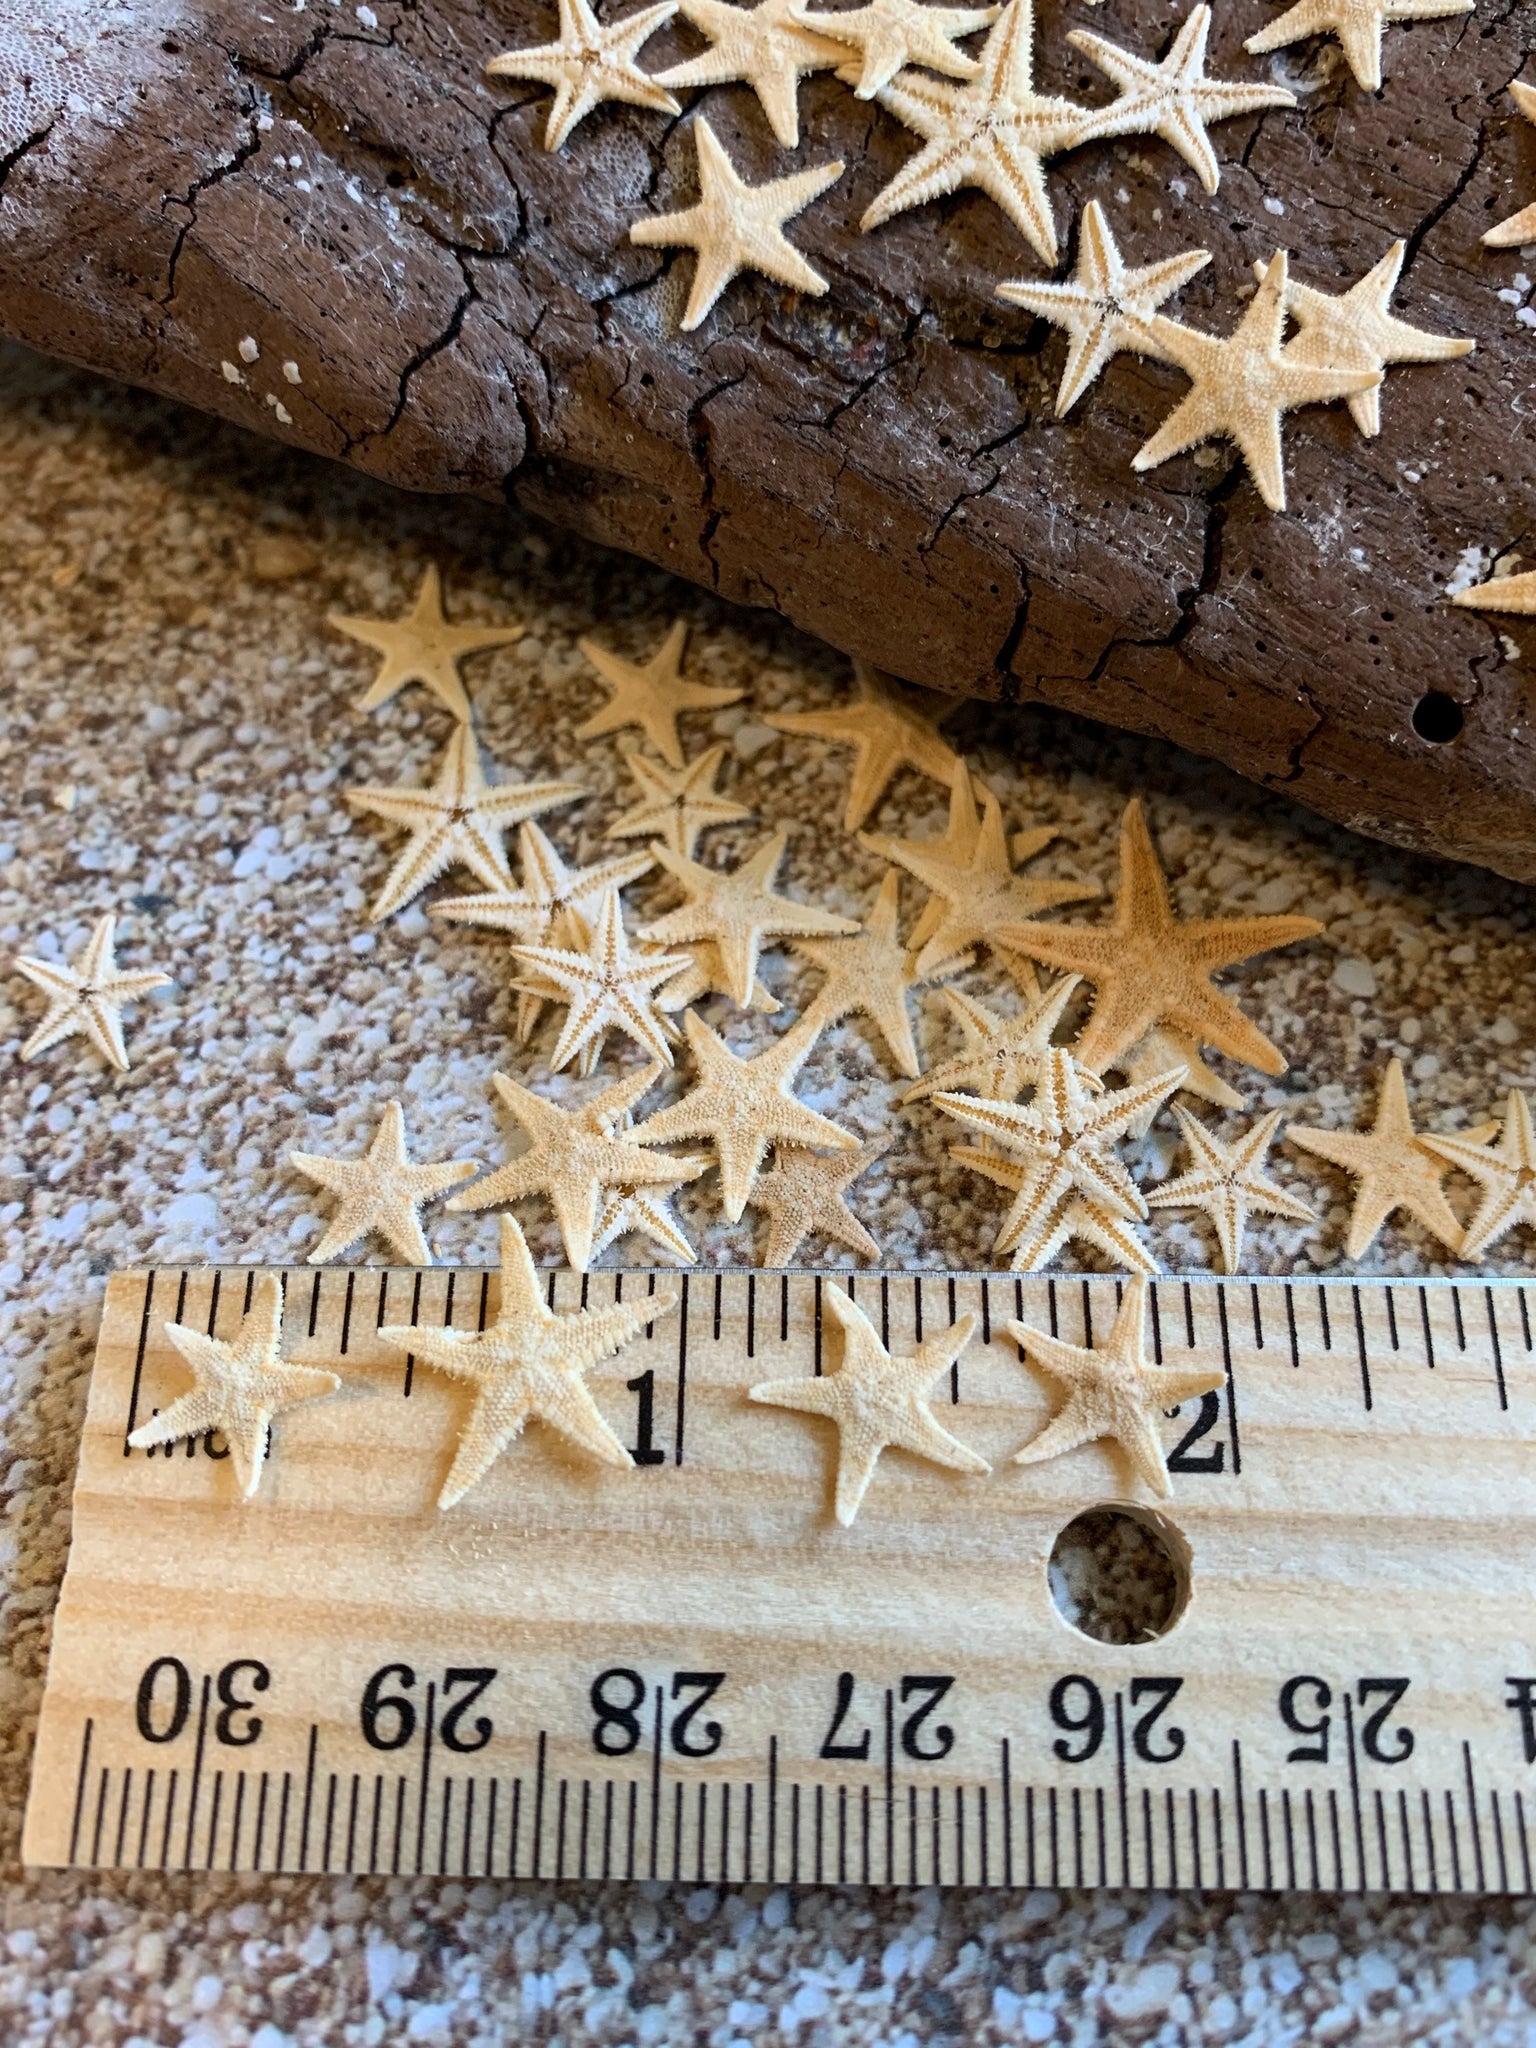  LUCKY BABY 16pcs Natural Starfish for Crafts, 1.9-5 Inch Bulk  Star Fish Shells Ornaments for Decor, Flat Sea Stars for Wedding Decoration  : Home & Kitchen